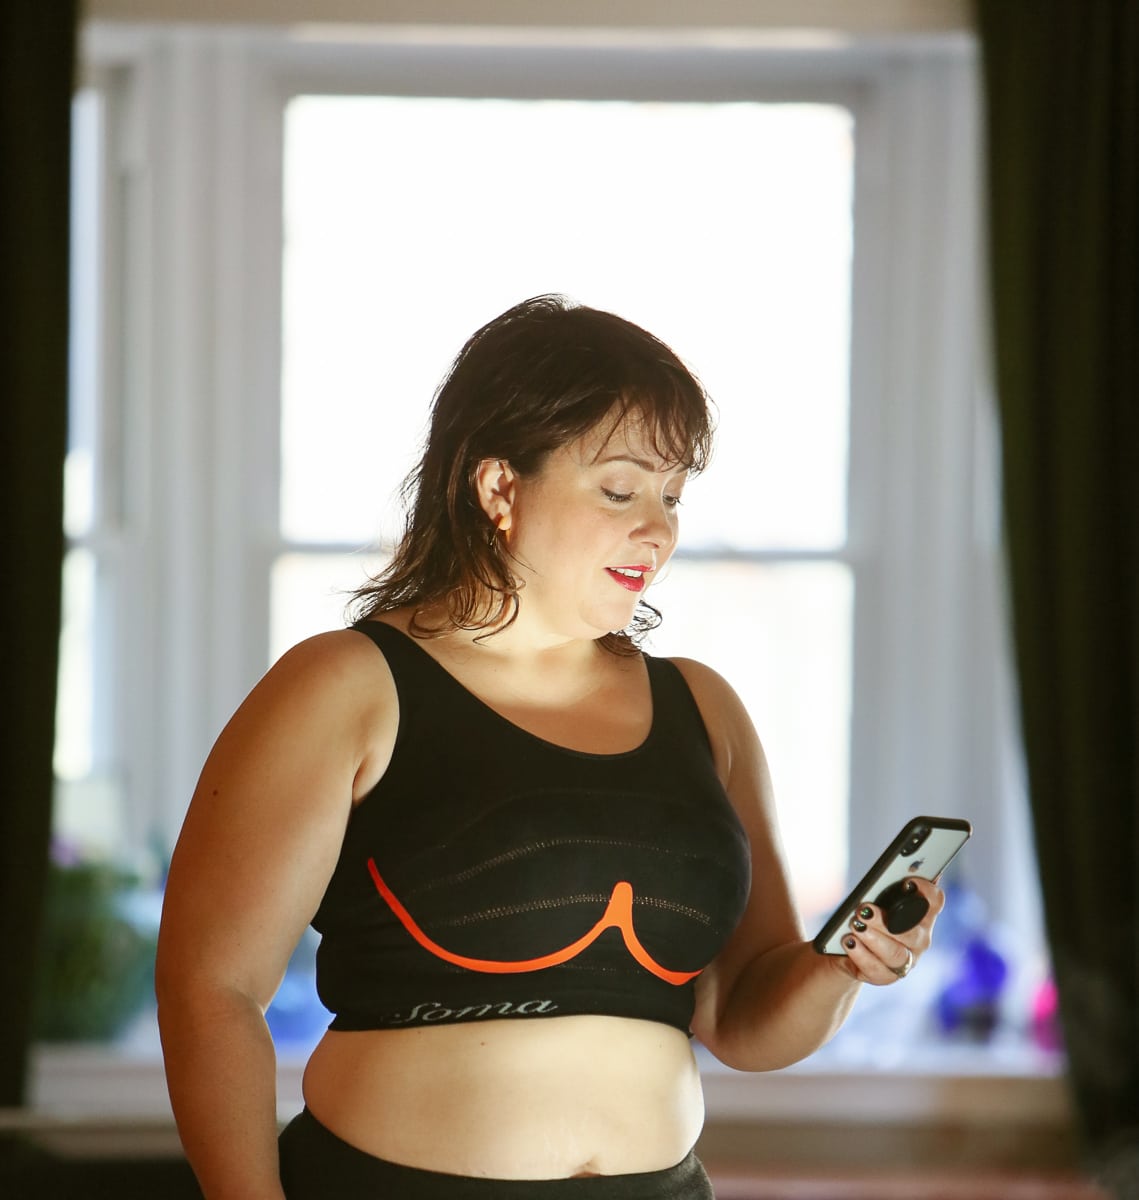 Alison wearing the Soma INNOFIT bra while looking at the INNOFIT app on her smartphone